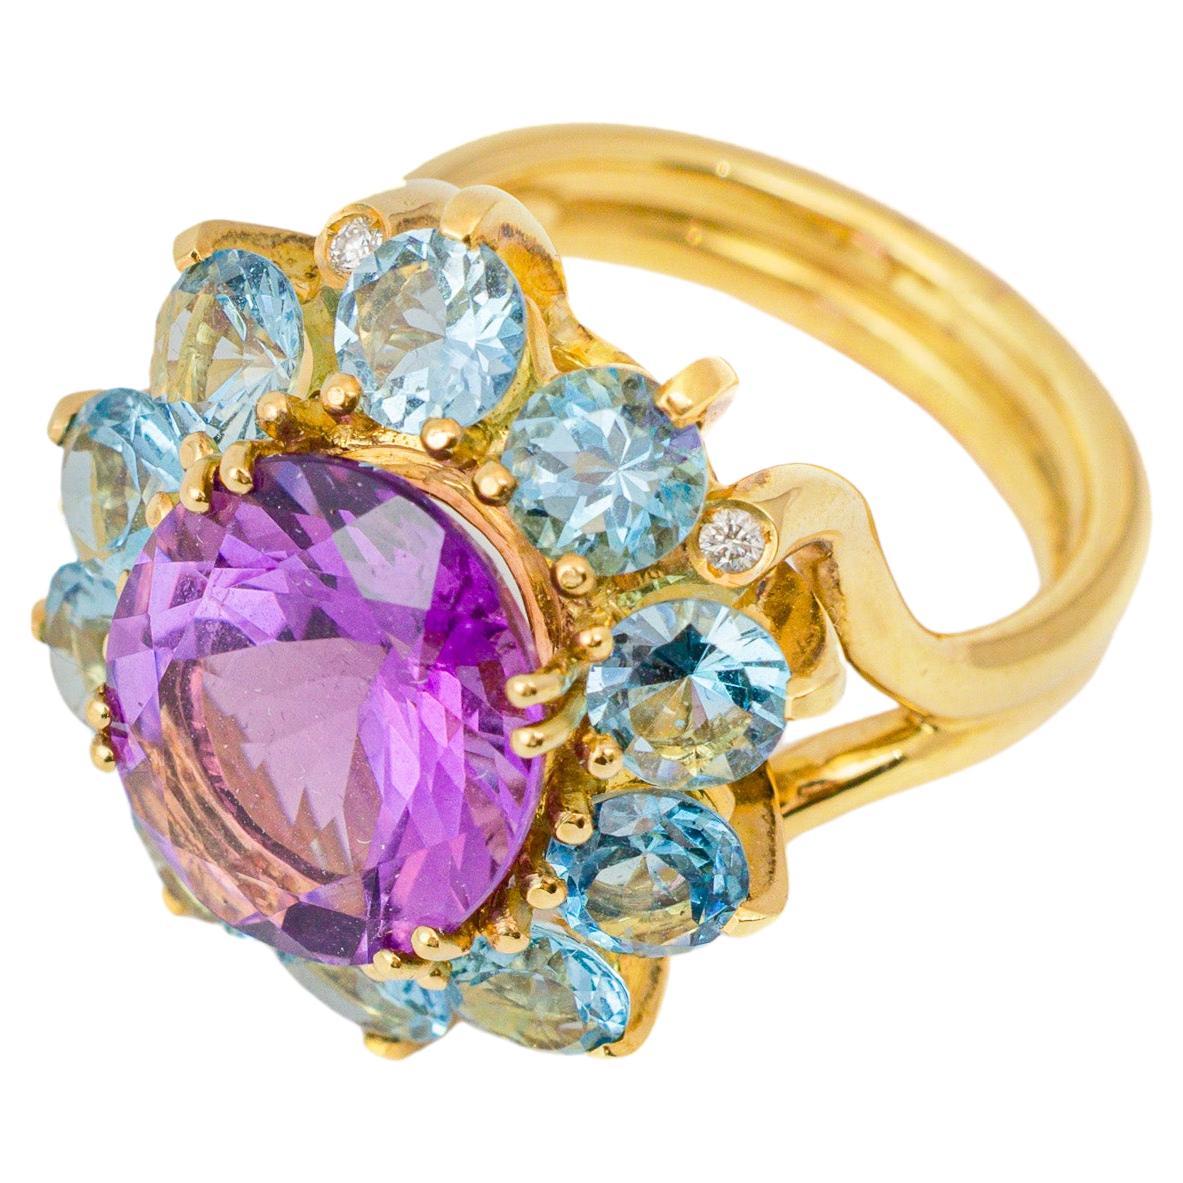 "Costis" Imperial Rosette Ring - Central Amethyst with Aquamarines in 18K Gold For Sale